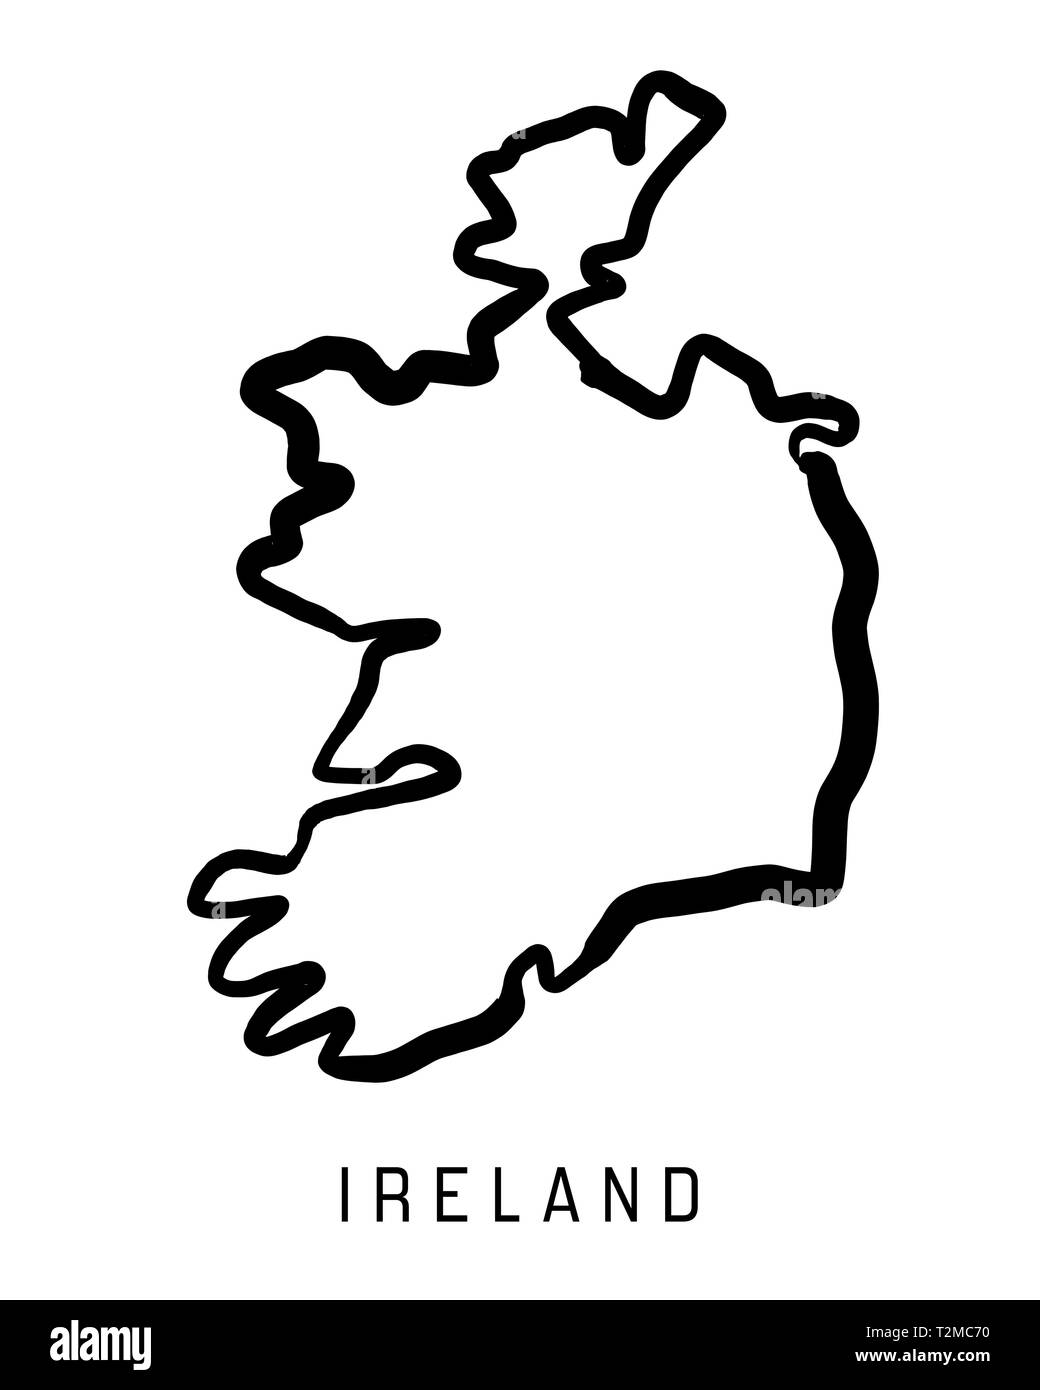 Republic of Ireland map outline - smooth country shape map vector. Stock Vector